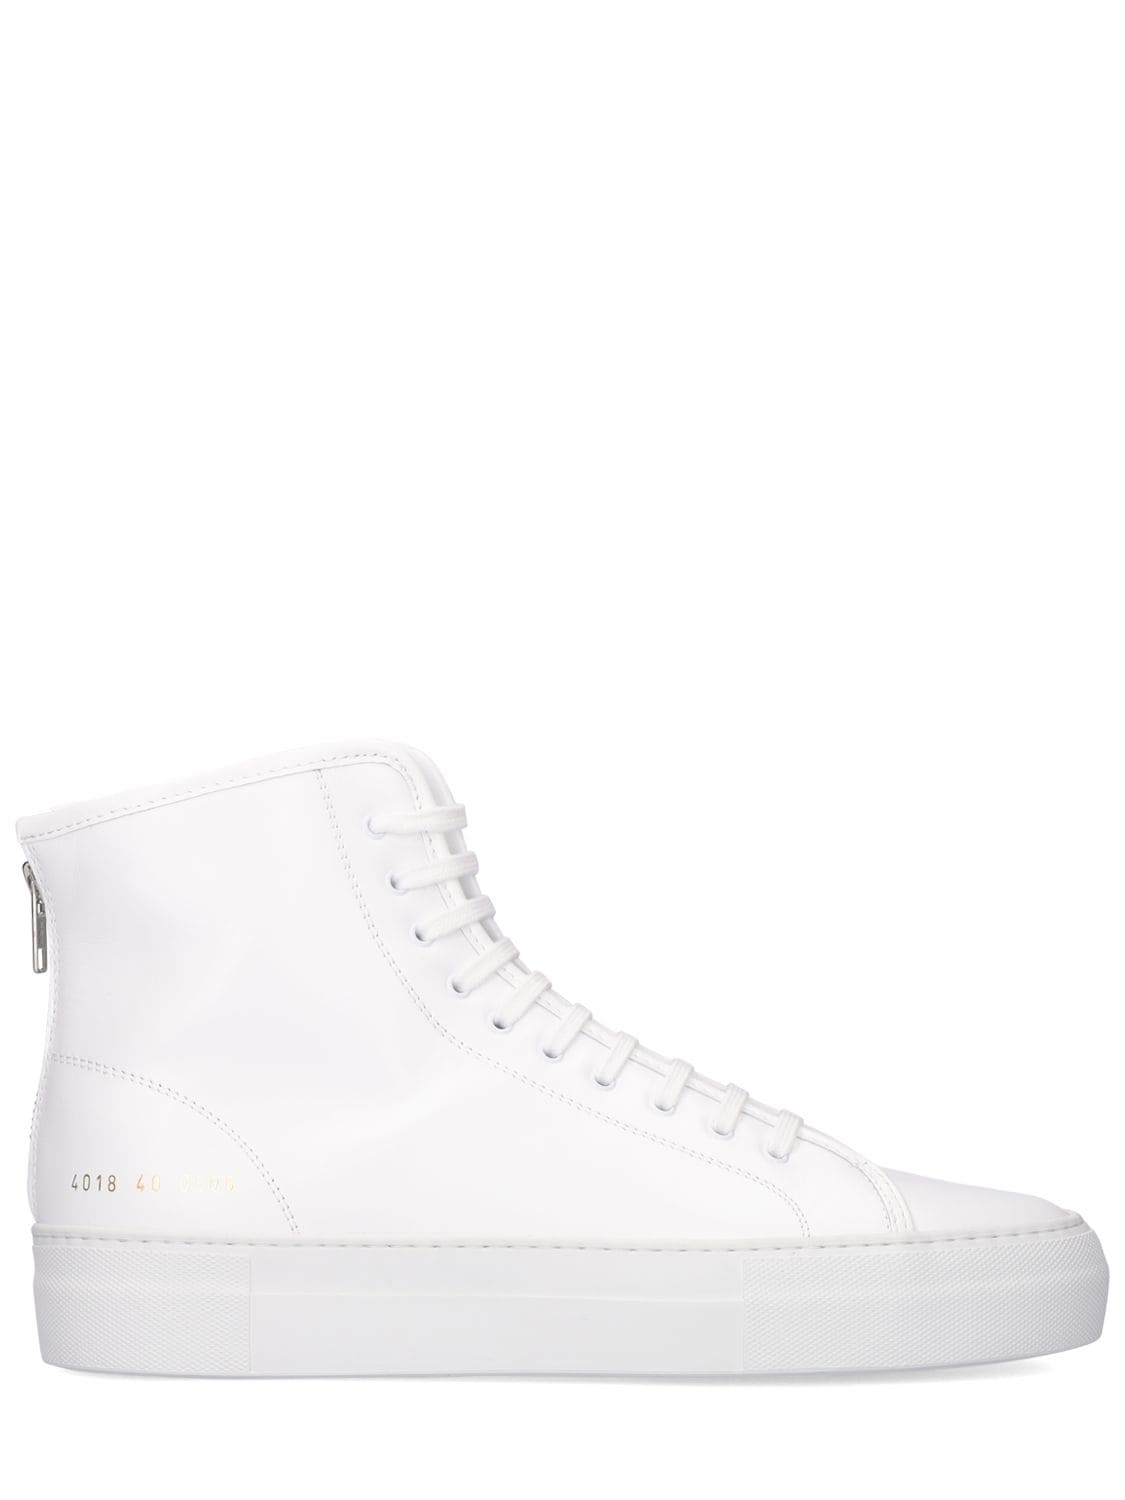 COMMON PROJECTS TOURNAMENT SUPER HIGH LEATHER trainers